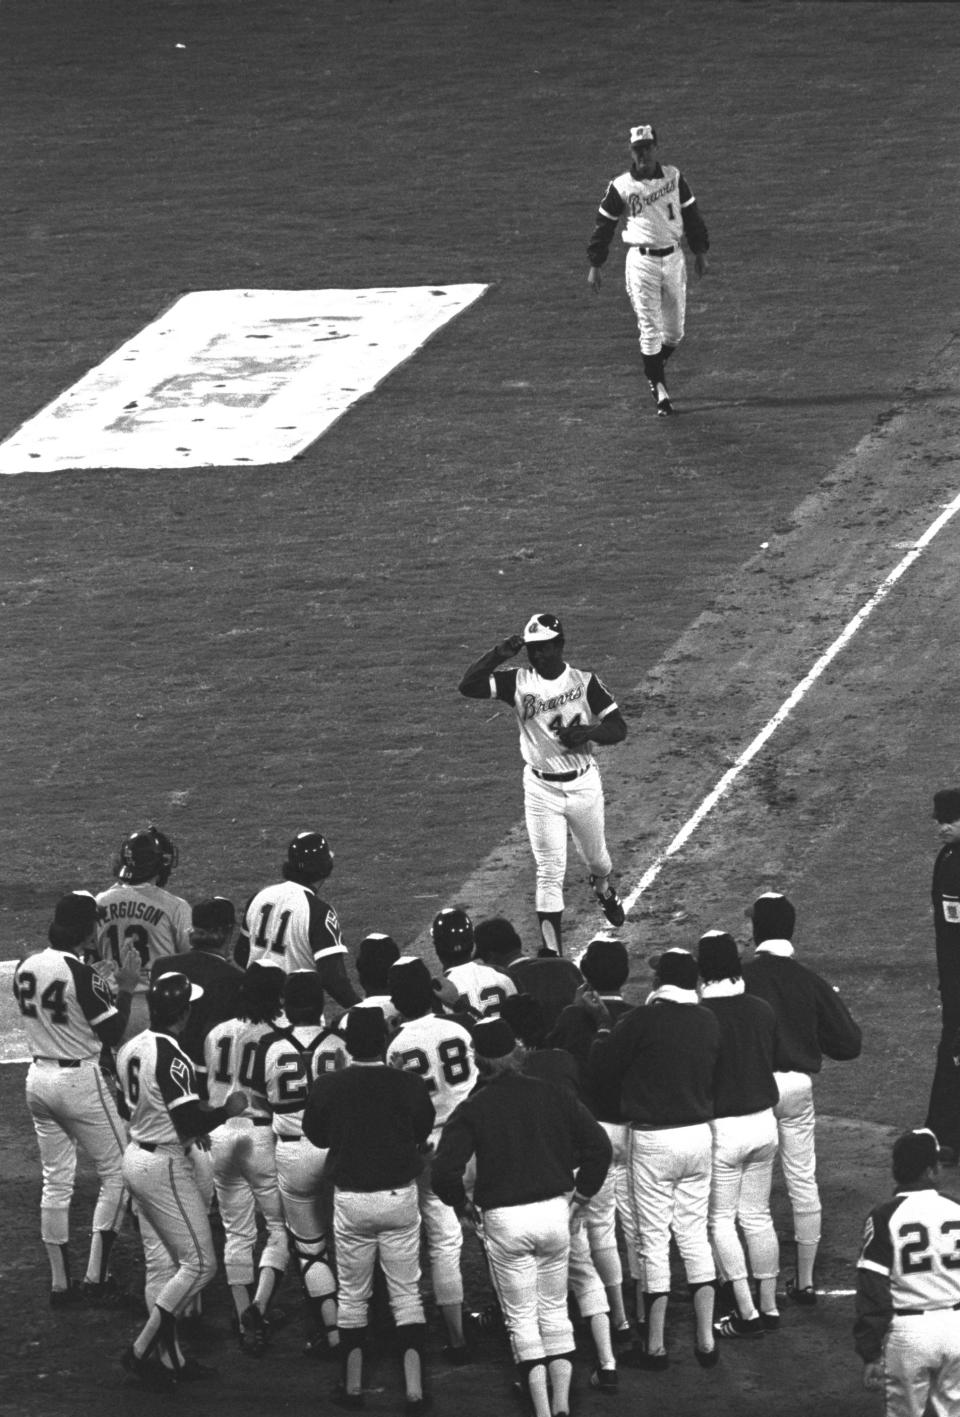 FILE - Atlanta Braves' Hank Aaron tips his hat to teammates greeting him at home plate after hitting his 715th career home run during a baseball game against the Los Angeles Dodgers in Atlanta, Monday, April 8, 1974. Just in time for the 50-year anniversary of Hank Aaron's record 715th home run, Charlie Russo is making available video he shot of the homer. (AP Photo/Joe Sebo, File)